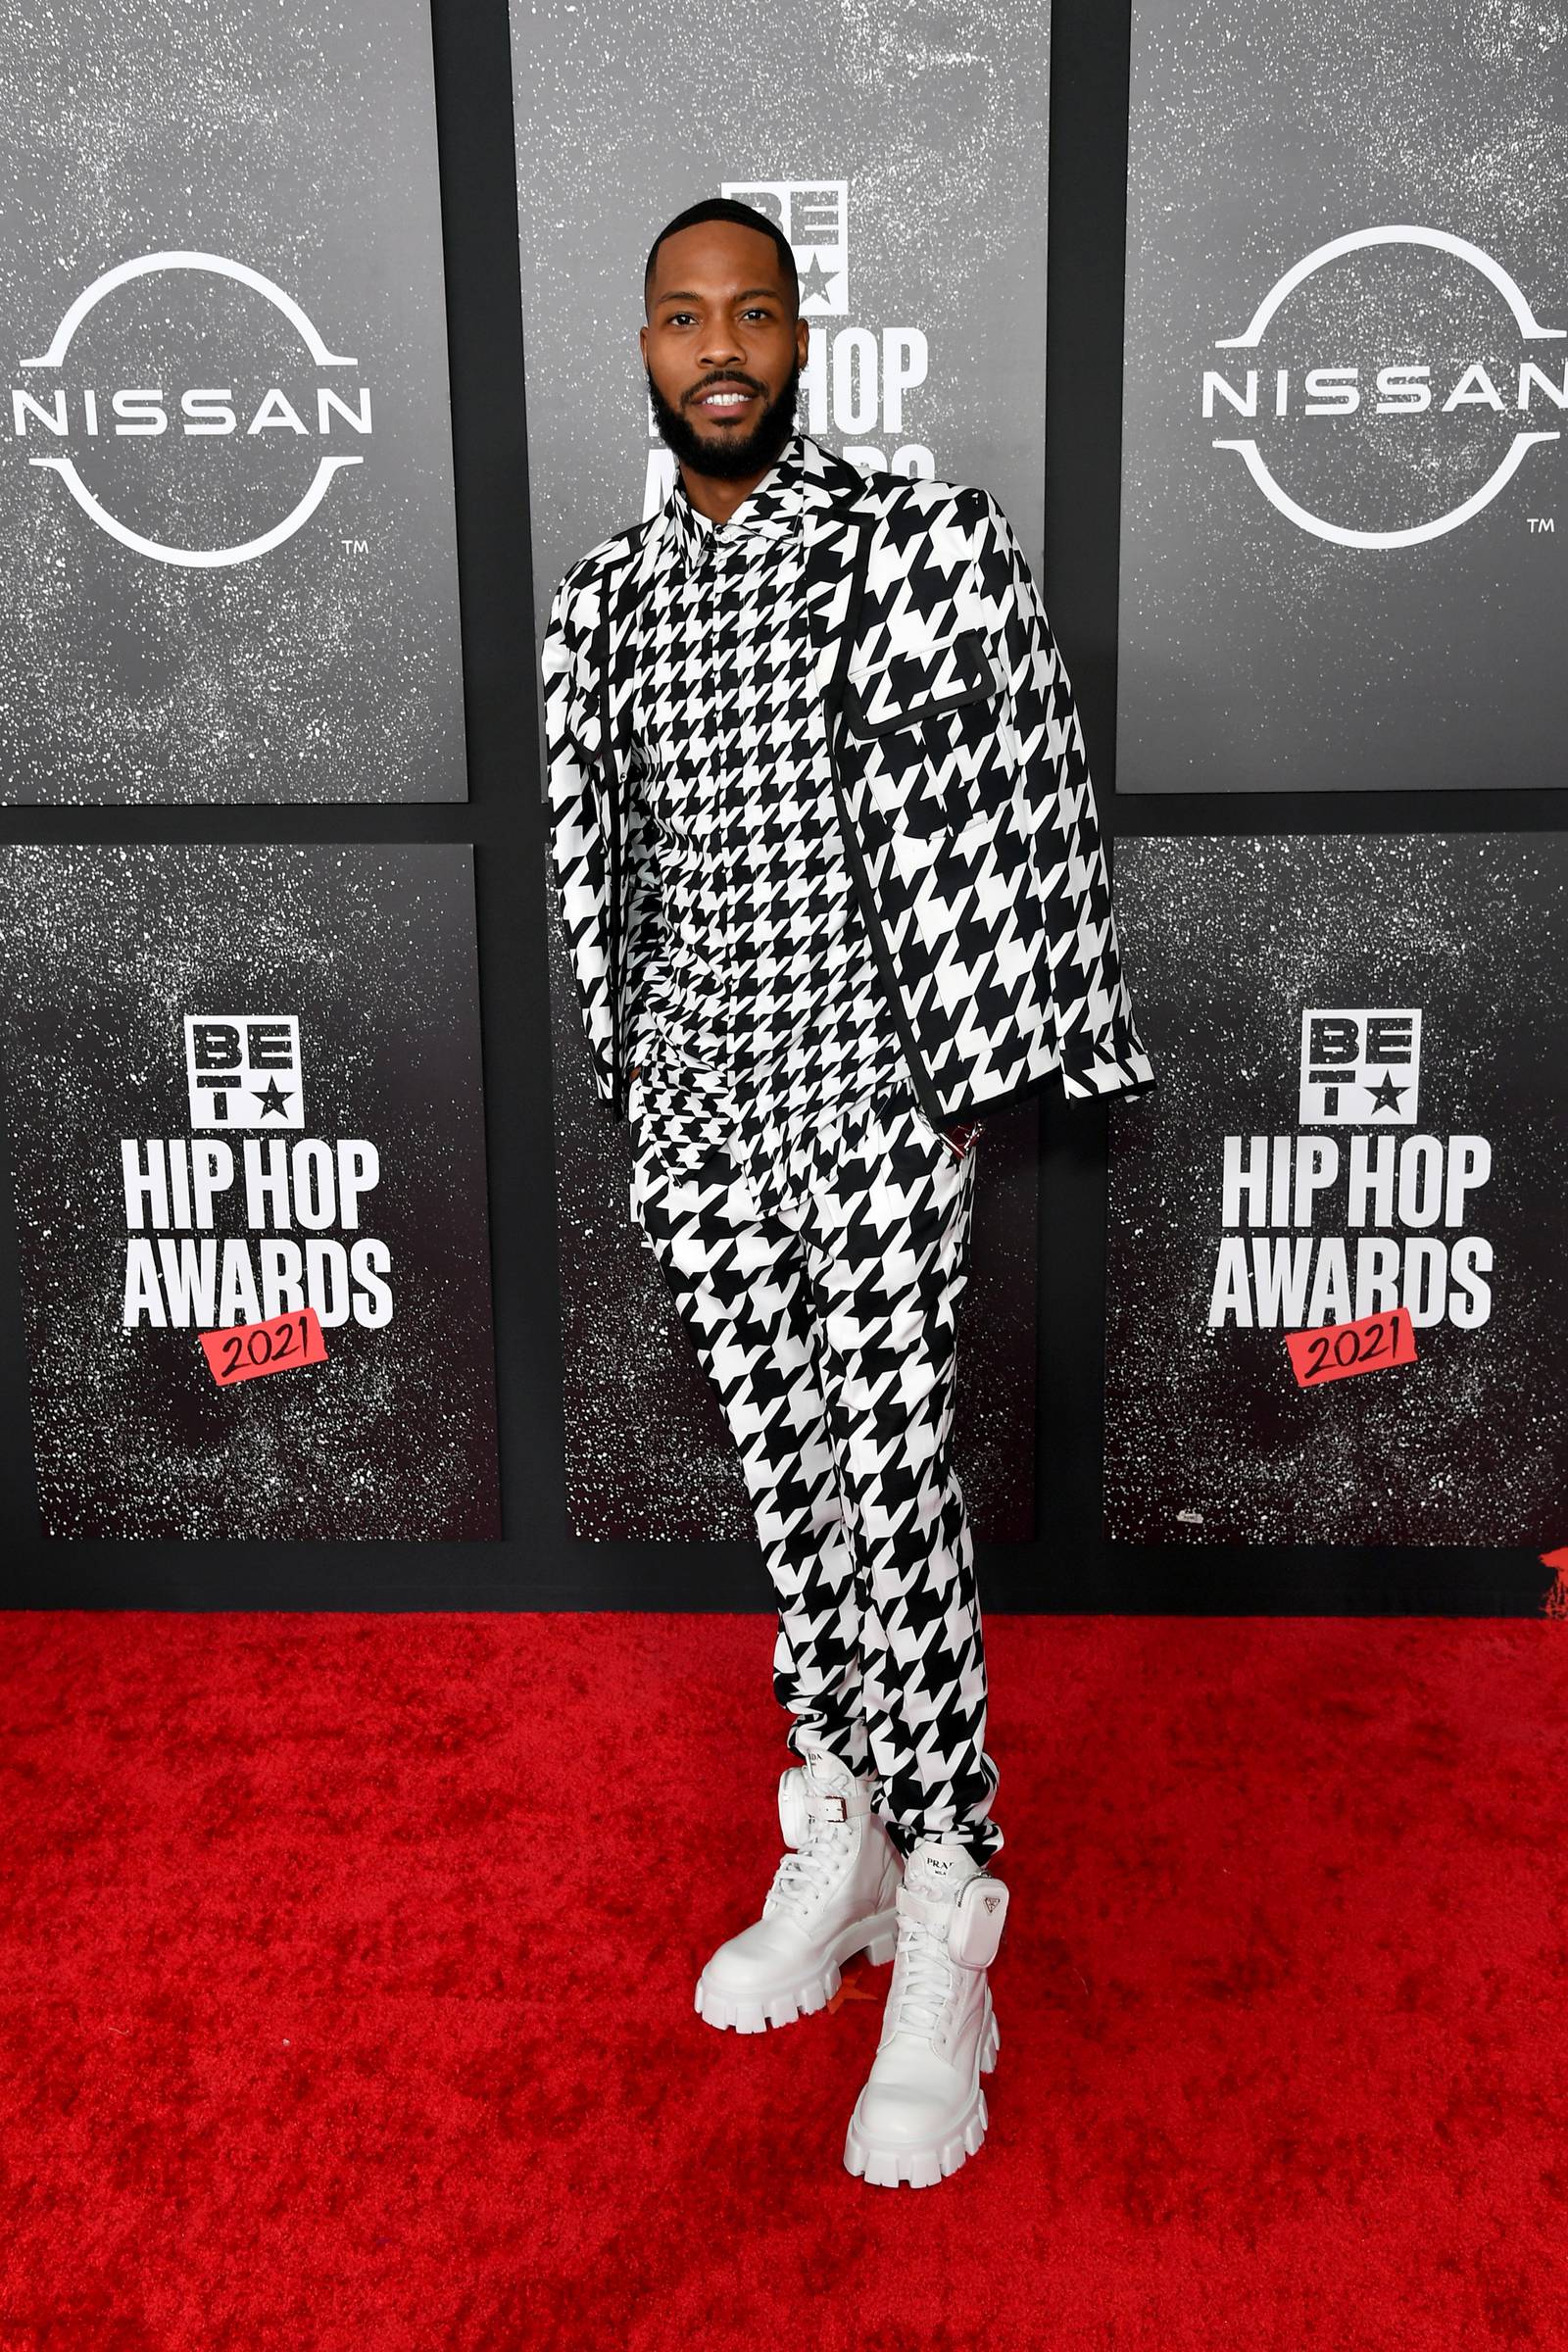 BET Hip Hop Awards 2021 See the complete list of winners WDBO